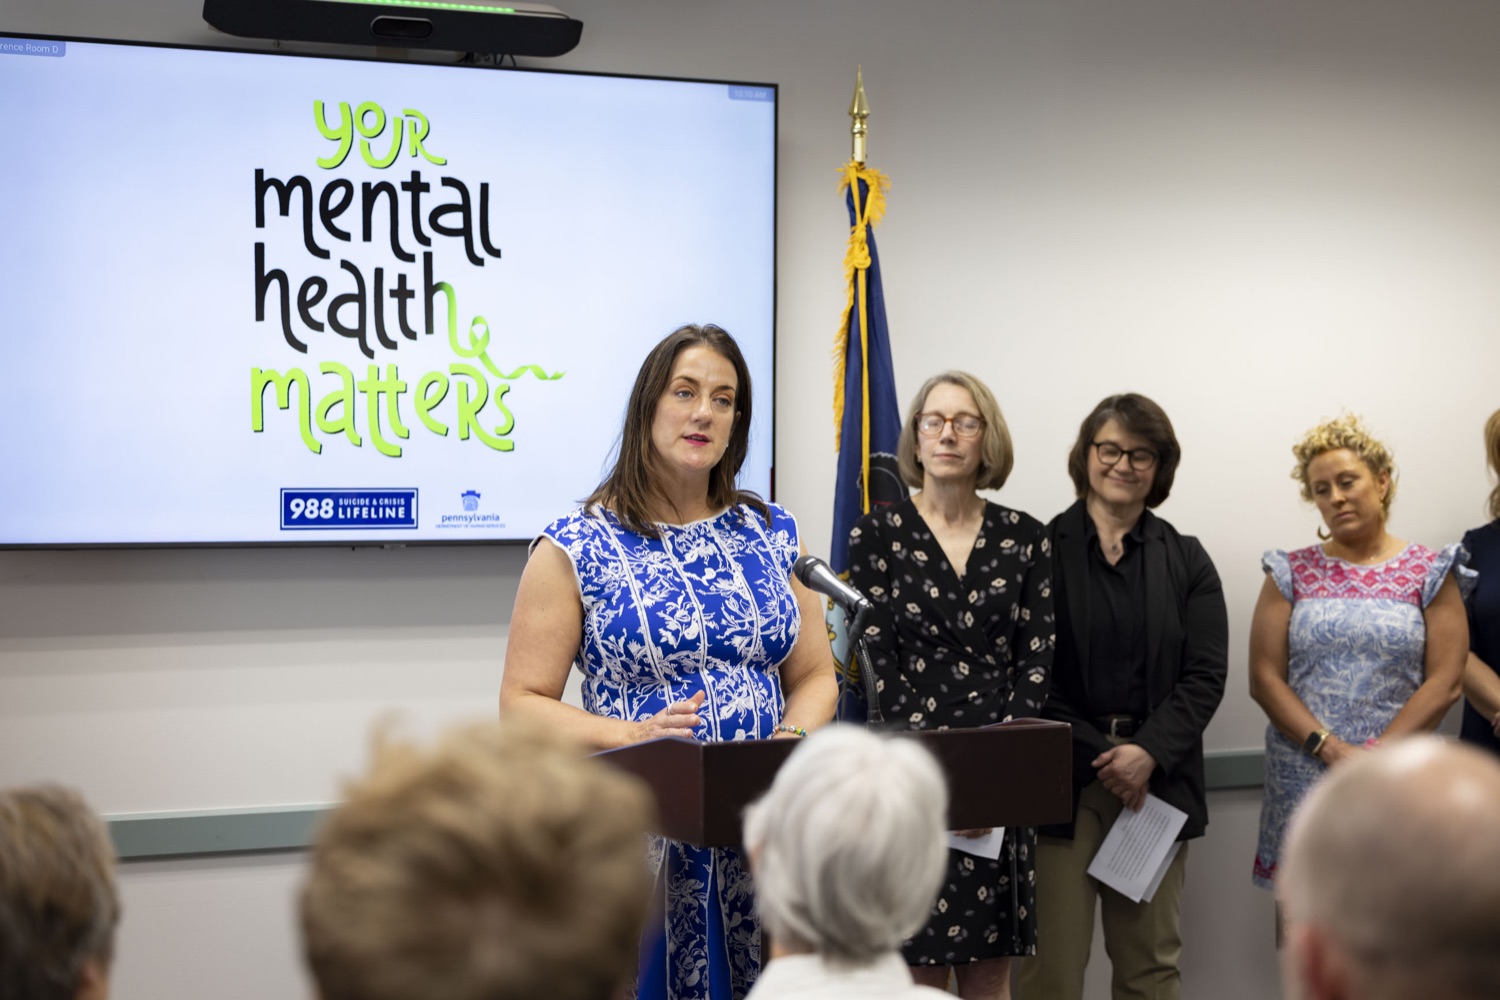 Cumberland County Commissioner Jean Foschi discusses the importance of increasing funding for county mental health programs, in Carlisle, PA on May 24, 2023.<br><a href="https://filesource.amperwave.net/commonwealthofpa/photo/23090_dhs_mentalHealth_07.jpg" target="_blank">⇣ Download Photo</a>